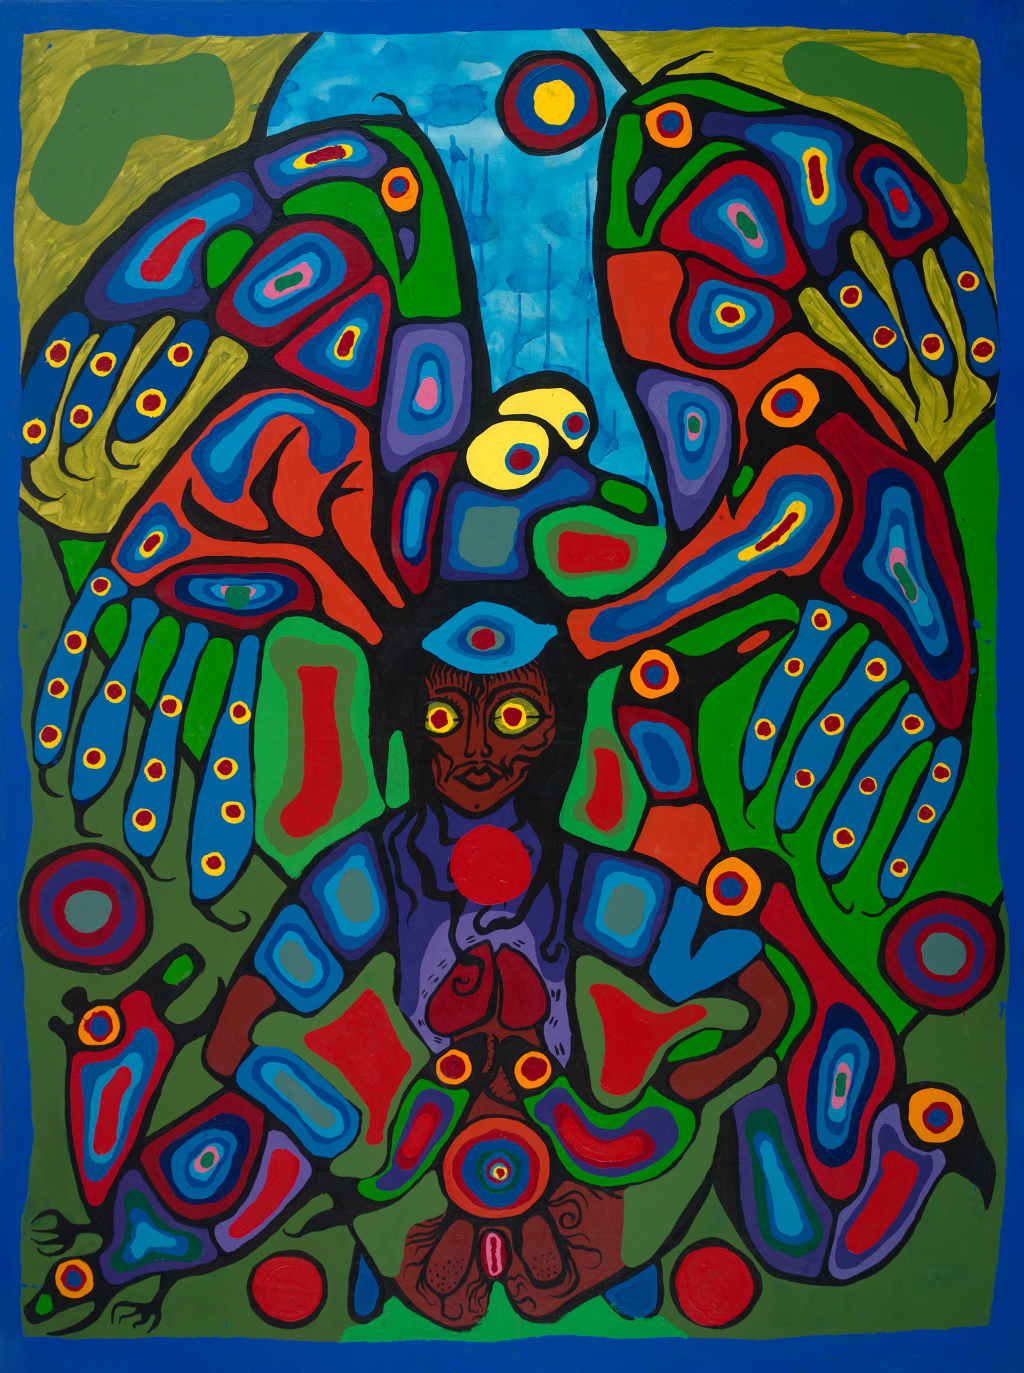 Painting of a shaman figure with wings and an erect phallus